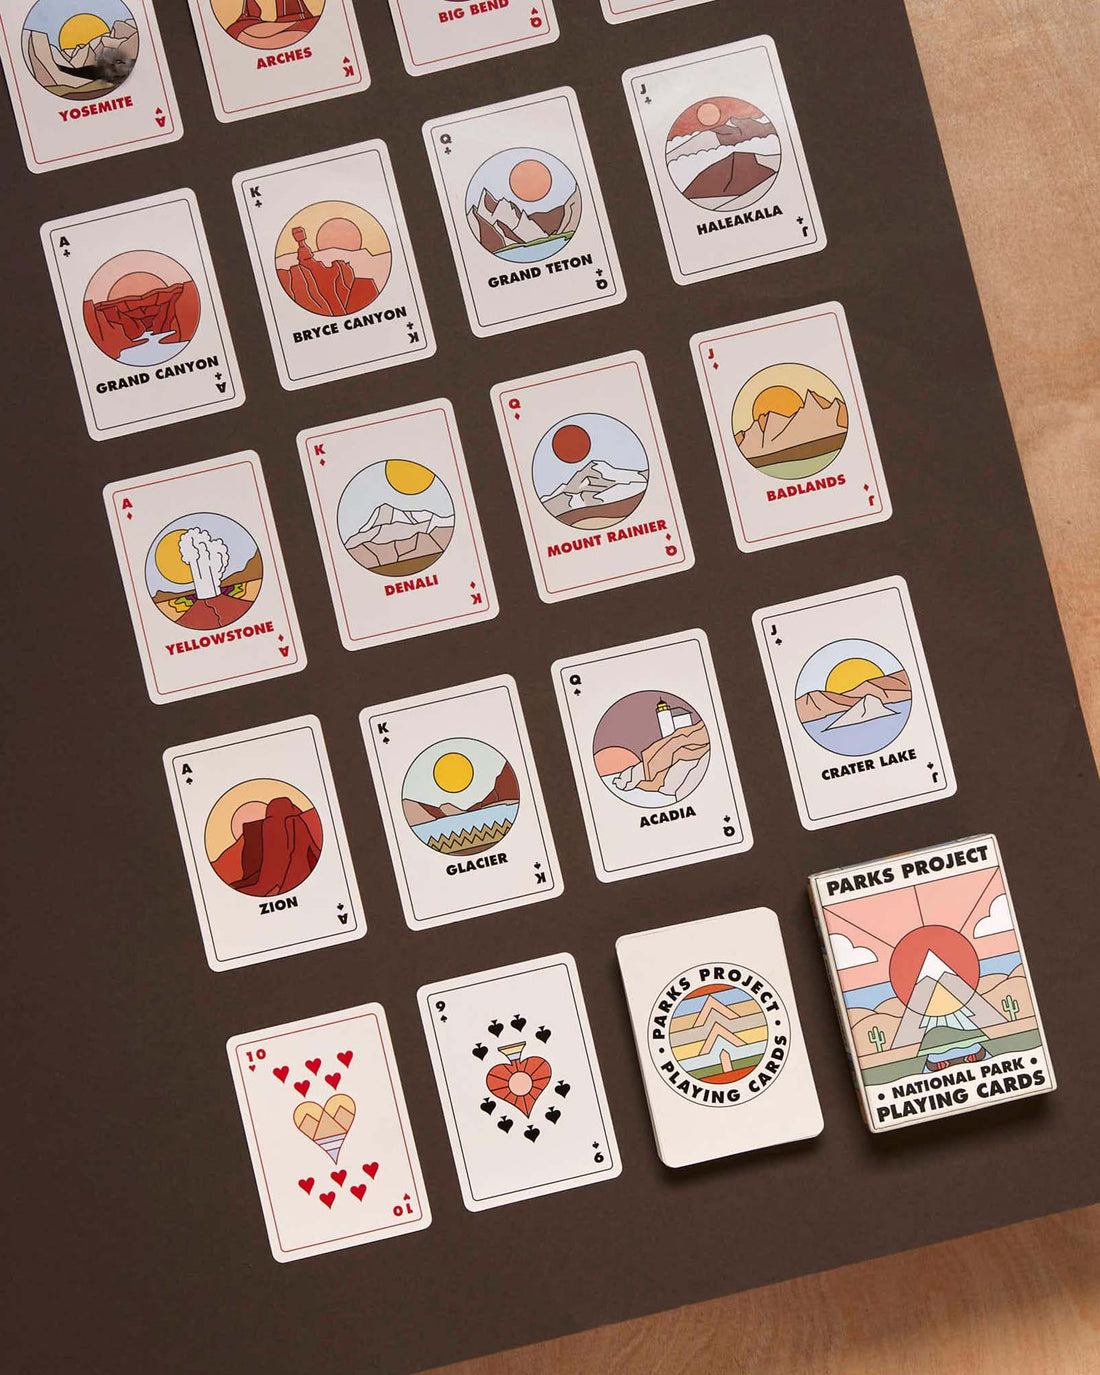 Over twenty National Parks playing cards laid out in a grid showcasing the minimalist colorful illustrations of the parks